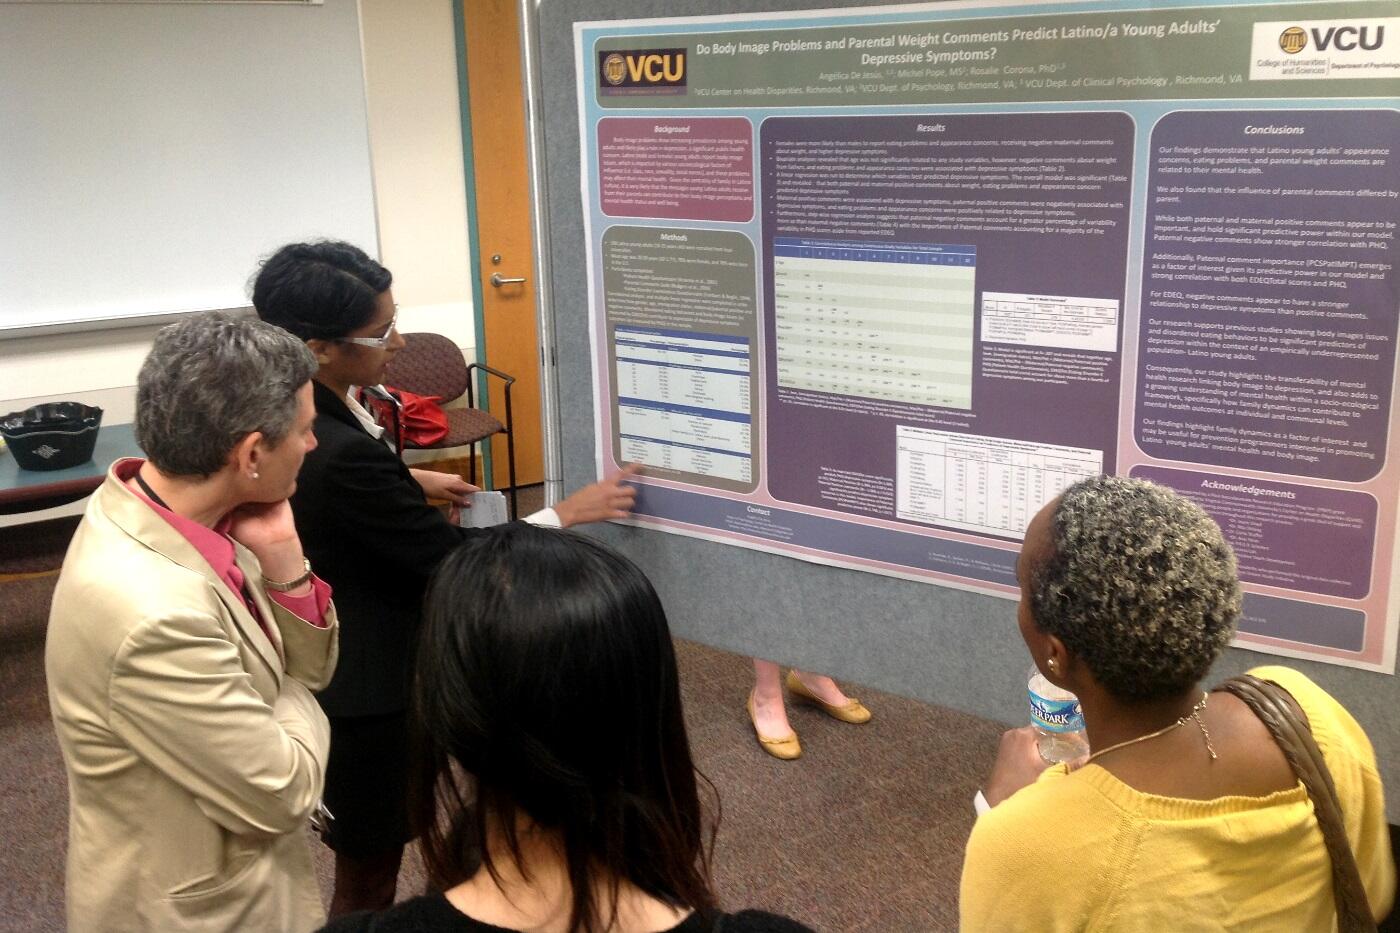 Angelica De Jesus, graduate student in the Department of Psychology, presented her research on body image problems and parental weight comments and how they predict Latino young adults’ depressive symptoms during the 10th Annual Women’s Health Research Day poster session.